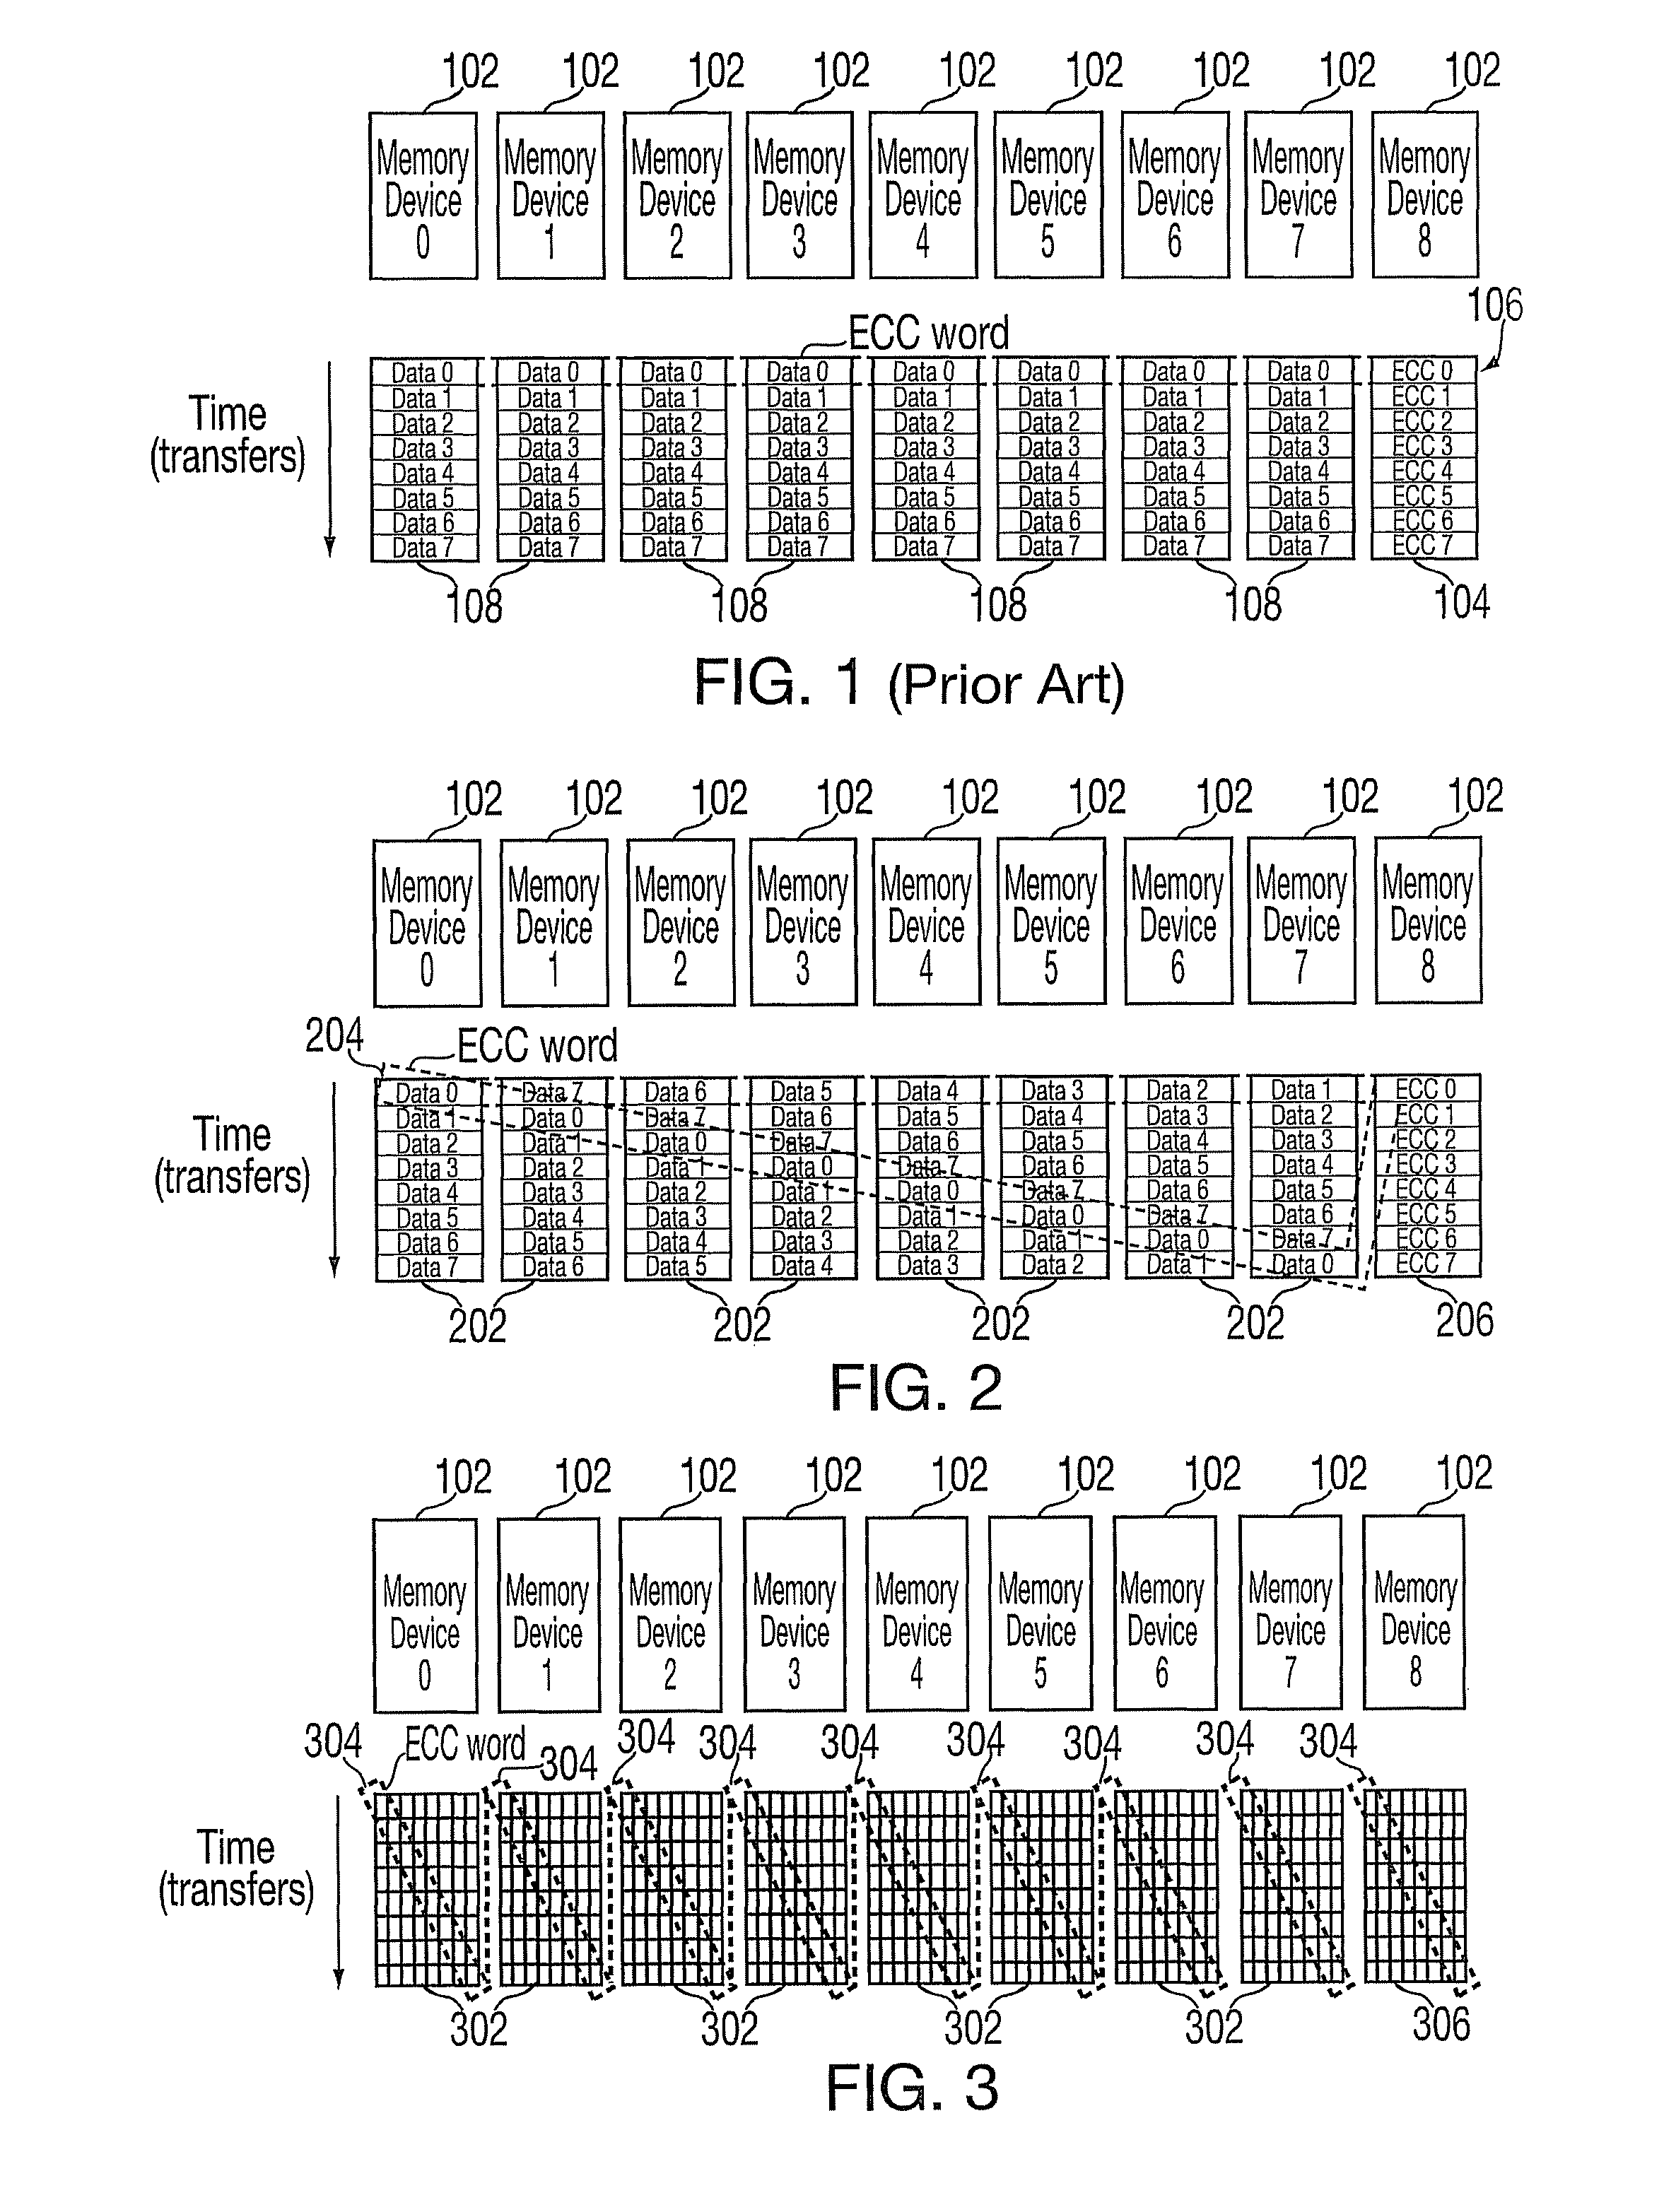 System and method for providing error correction and detection in a memory system